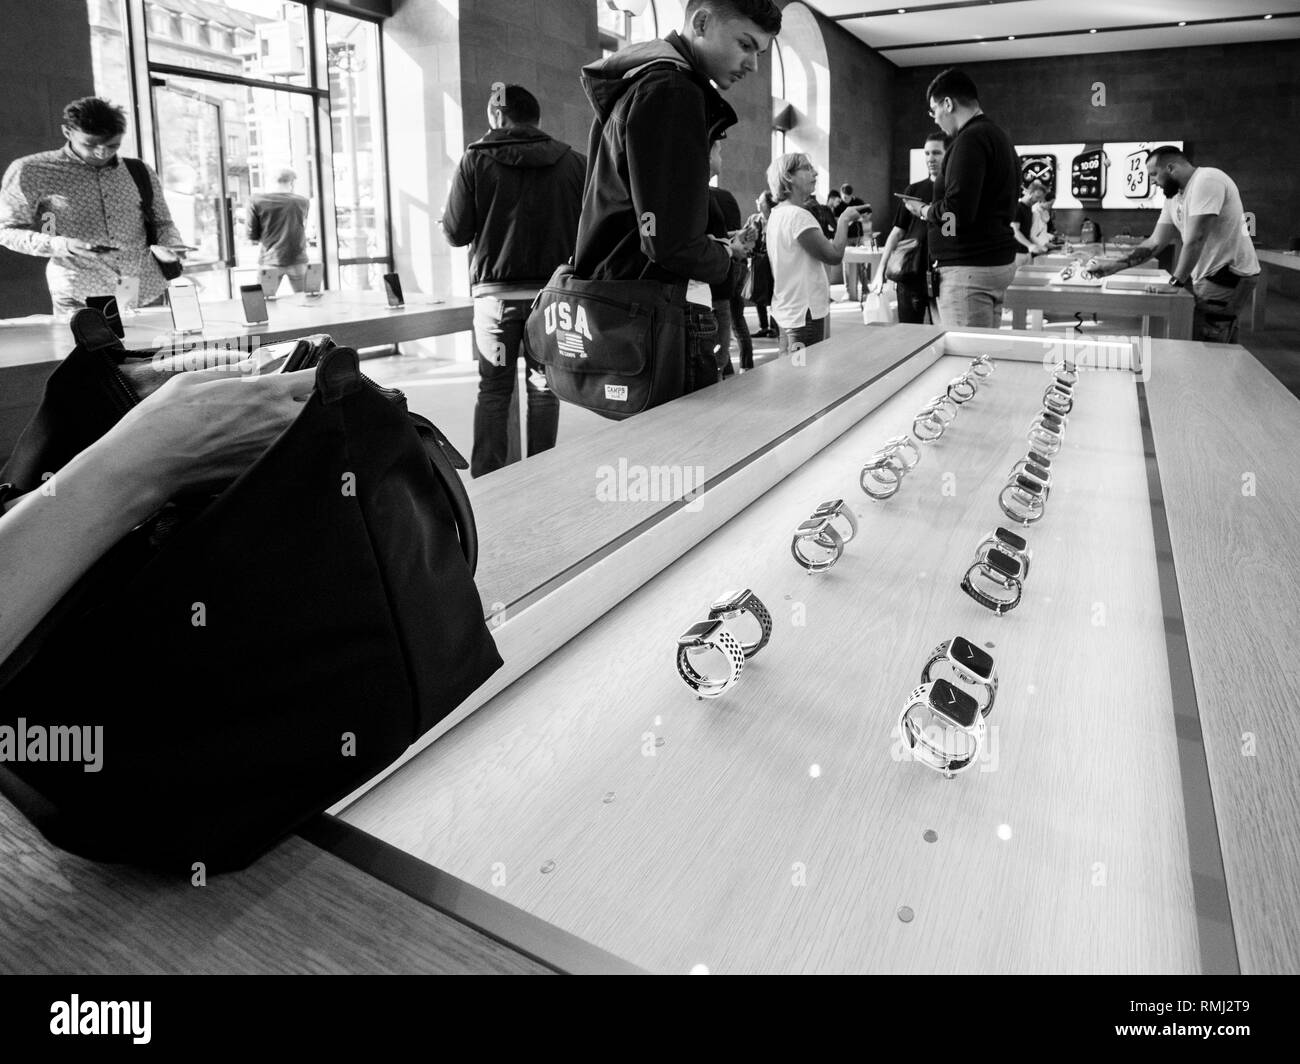 STRASBOURG, FRANCE - SEP 21, 2018: Apple Store with customers people buying admiring the new latest Apple Computers Watch Series 4 wearable smart watch - presentation in a row black and white Stock Photo